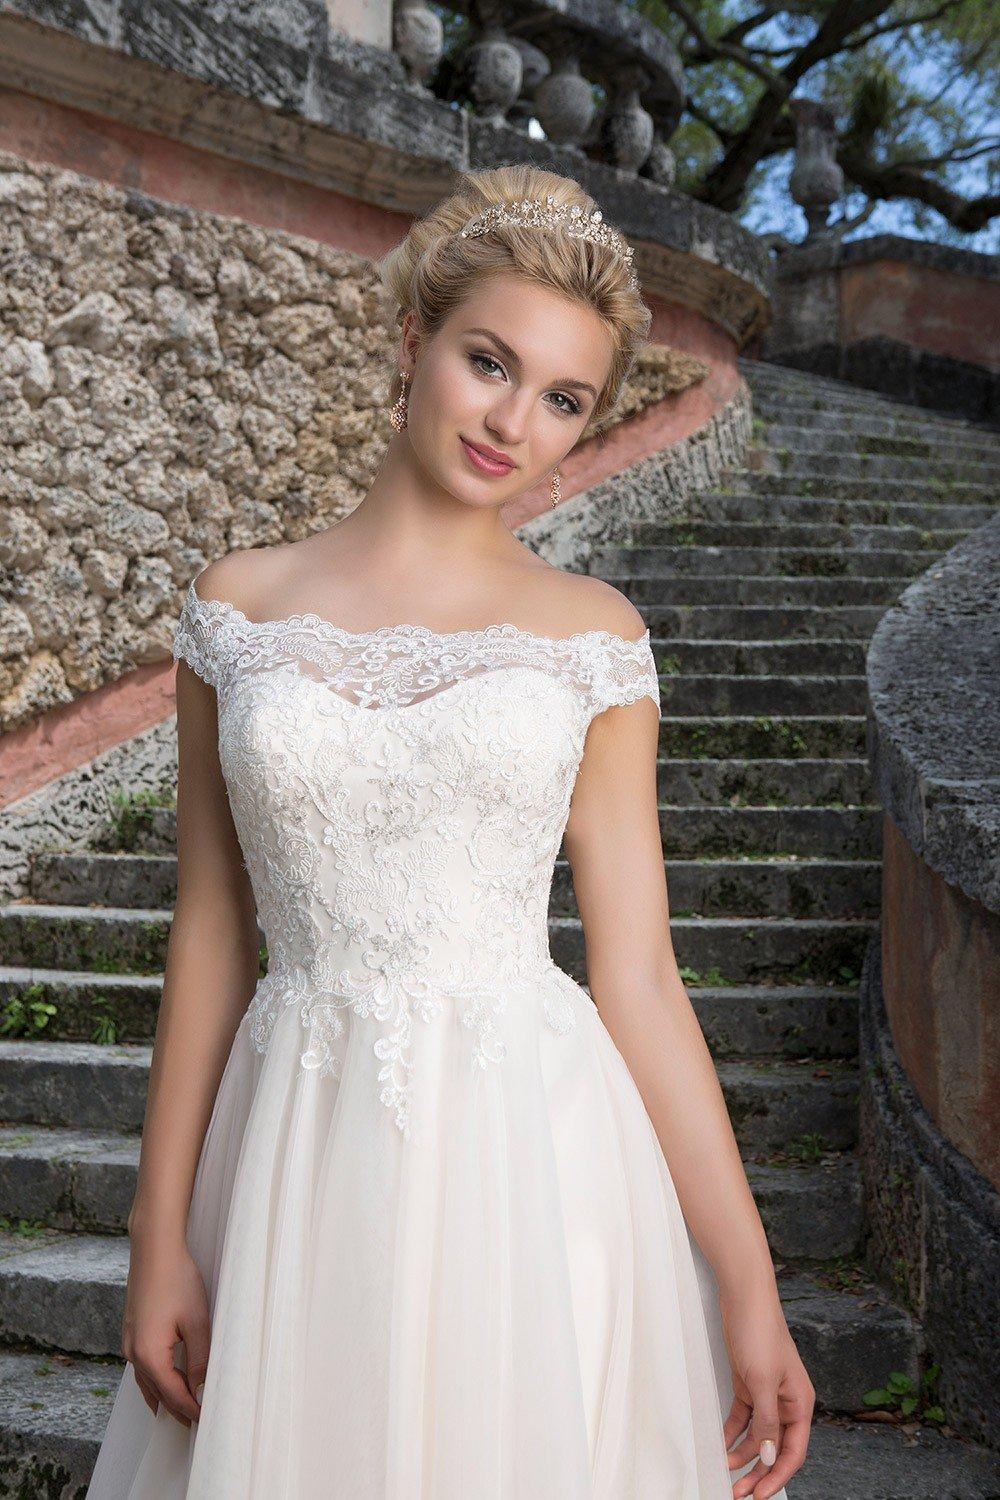 Wedding Dresses for Women with Broad Shoulders - Wedding Style Magazine